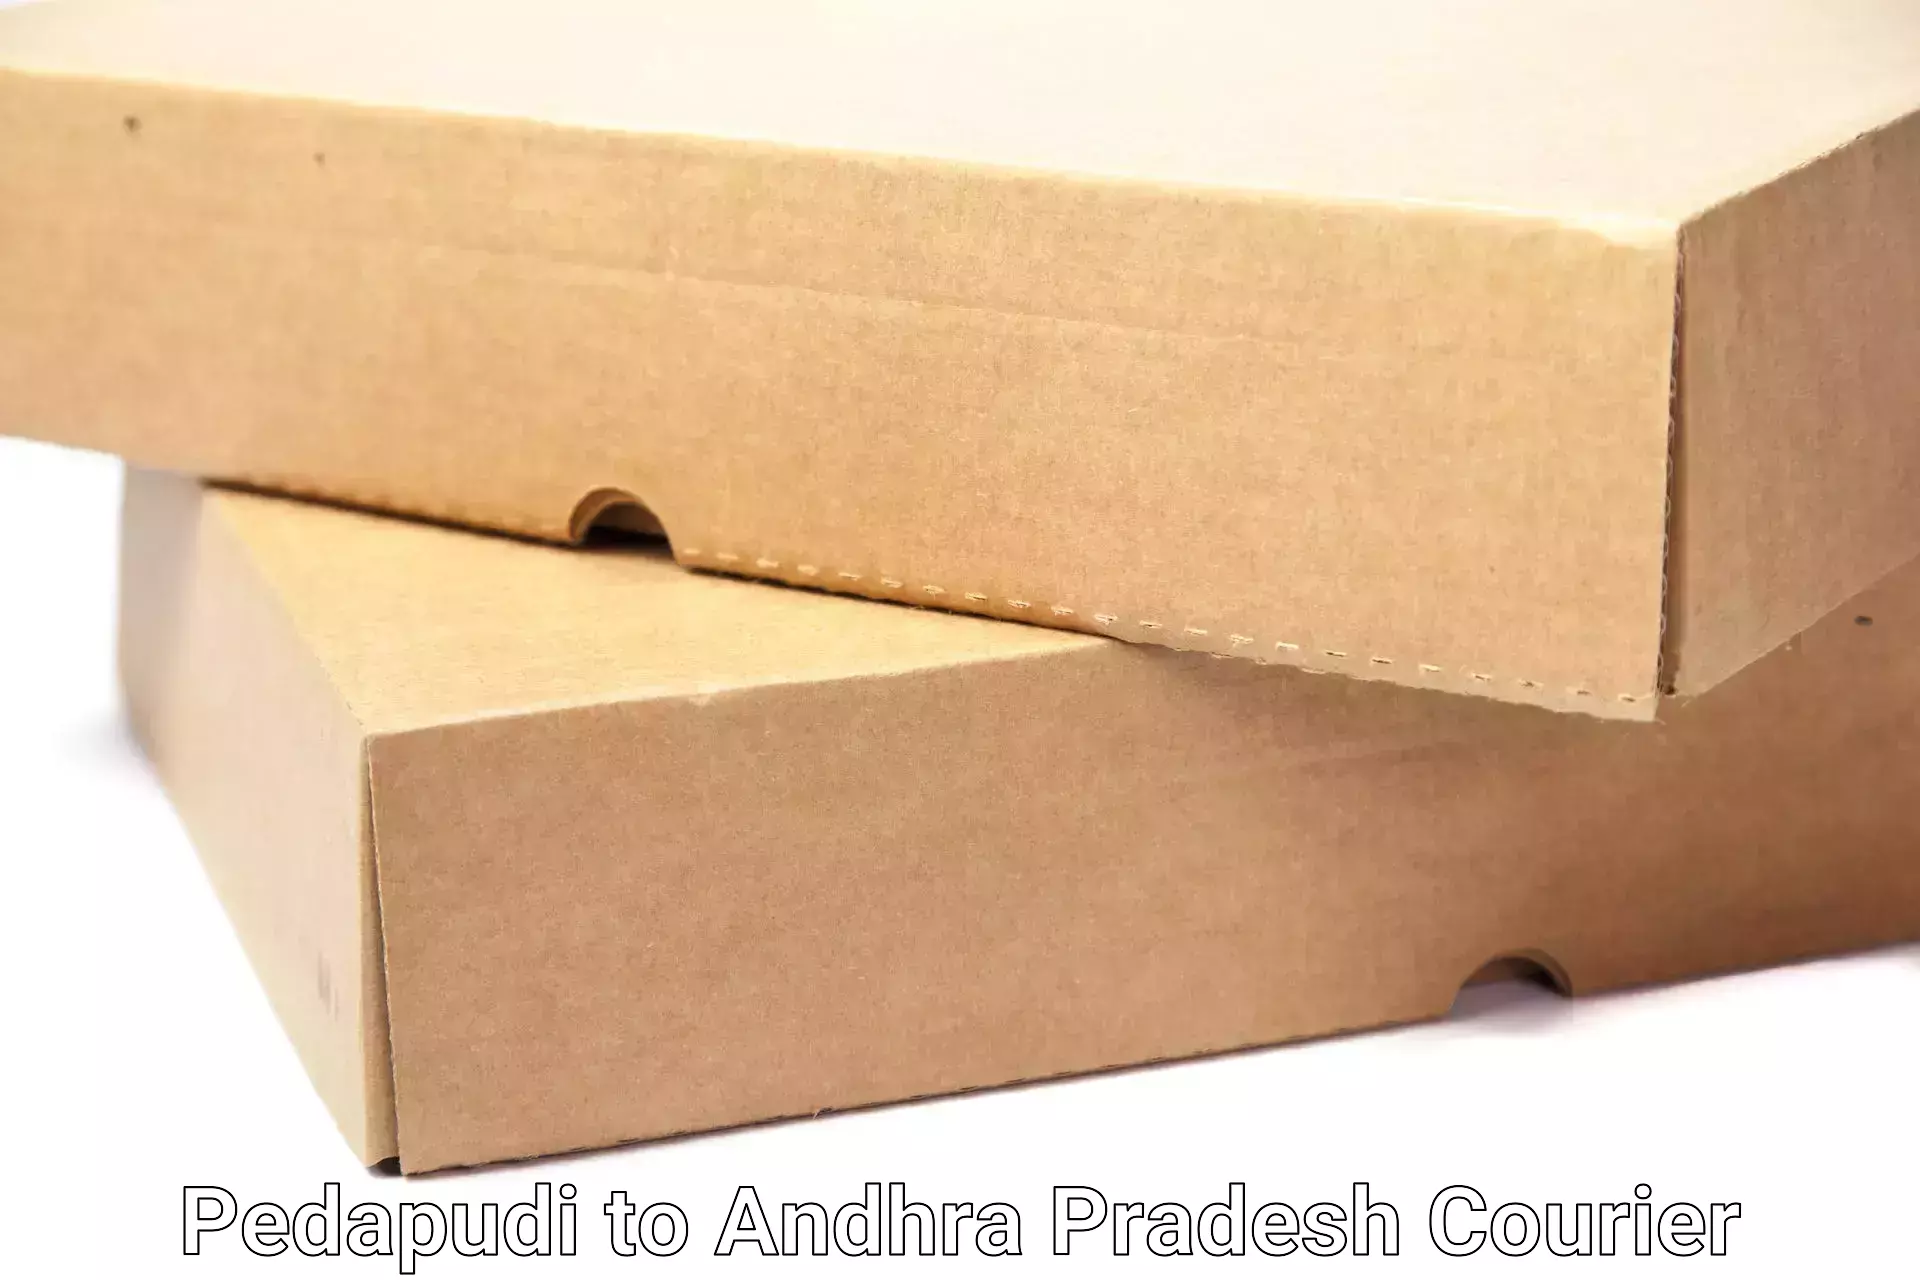 Advanced moving solutions Pedapudi to Andhra Pradesh